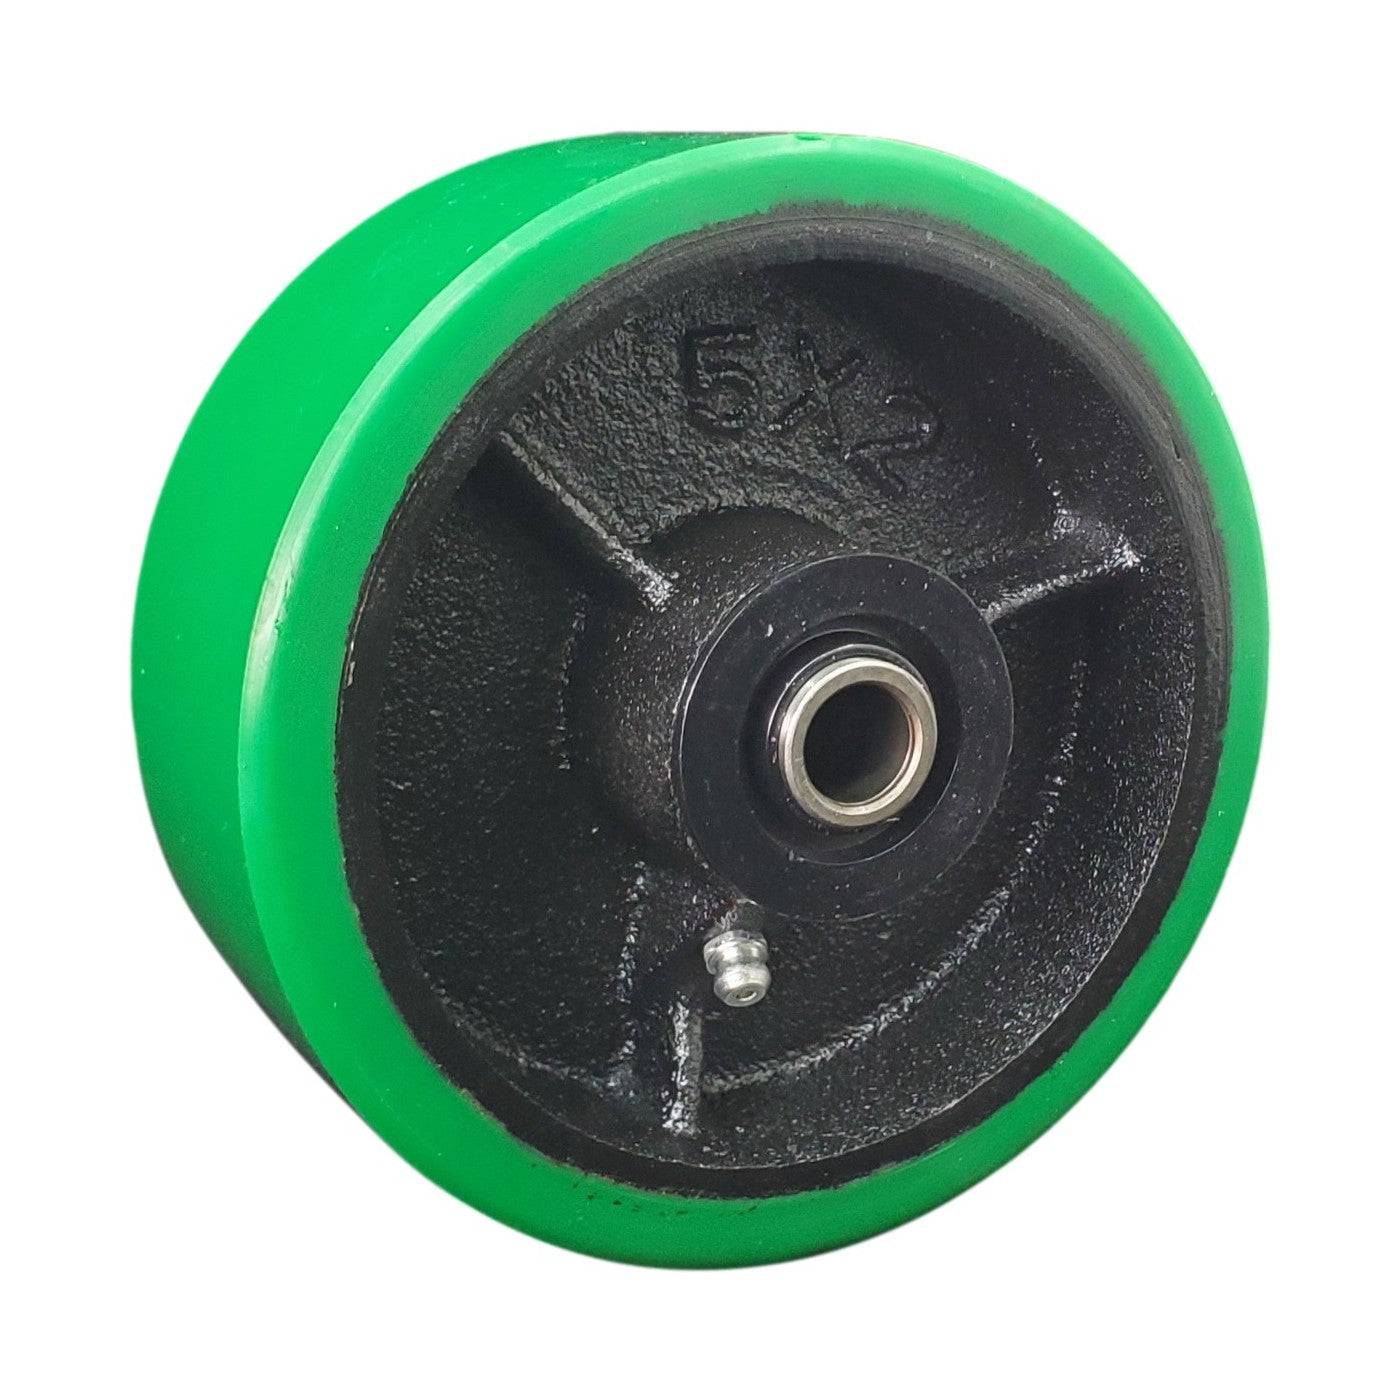 5" x 2" Polyon Cast Wheel - 1000 lbs. Capacity - Durable Superior Casters